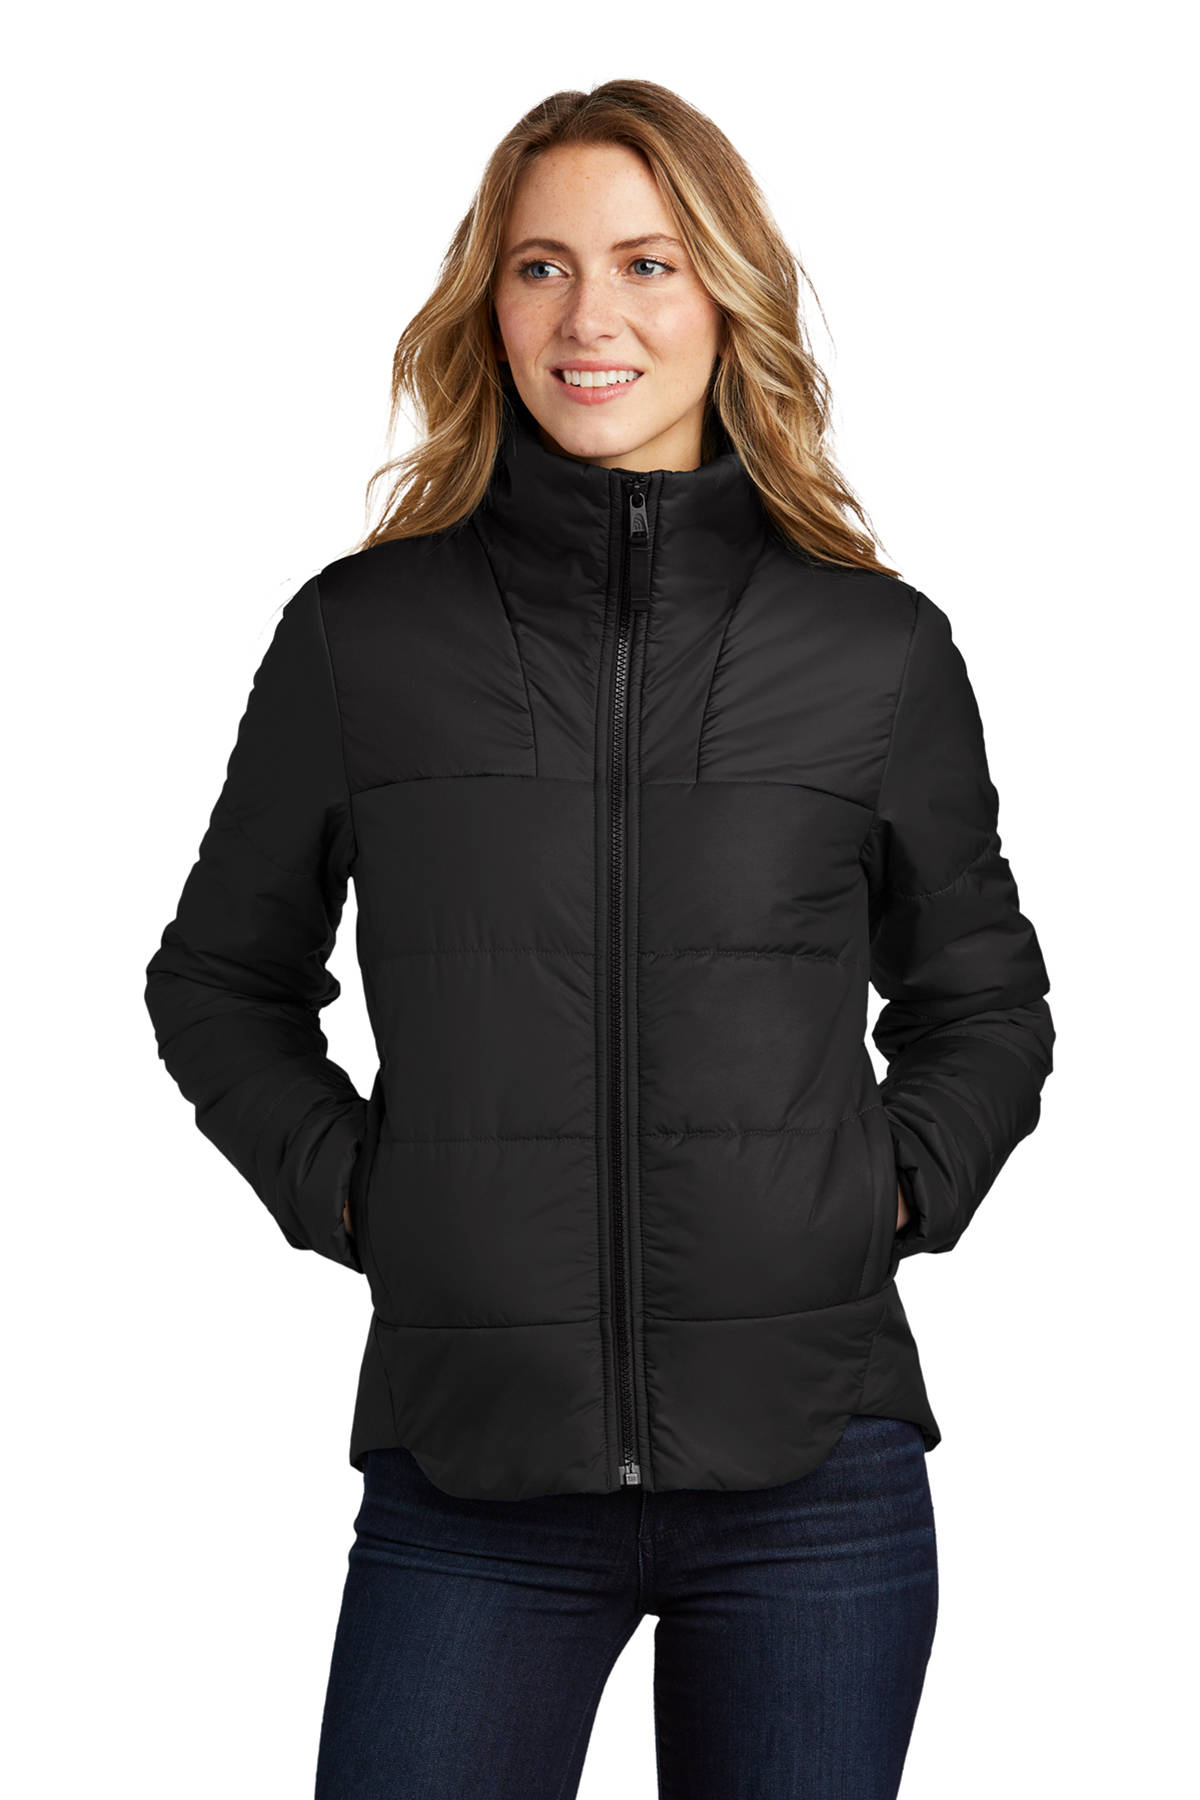 The North Face Ladies Everyday Insulated Jacket | Product | Company Casuals